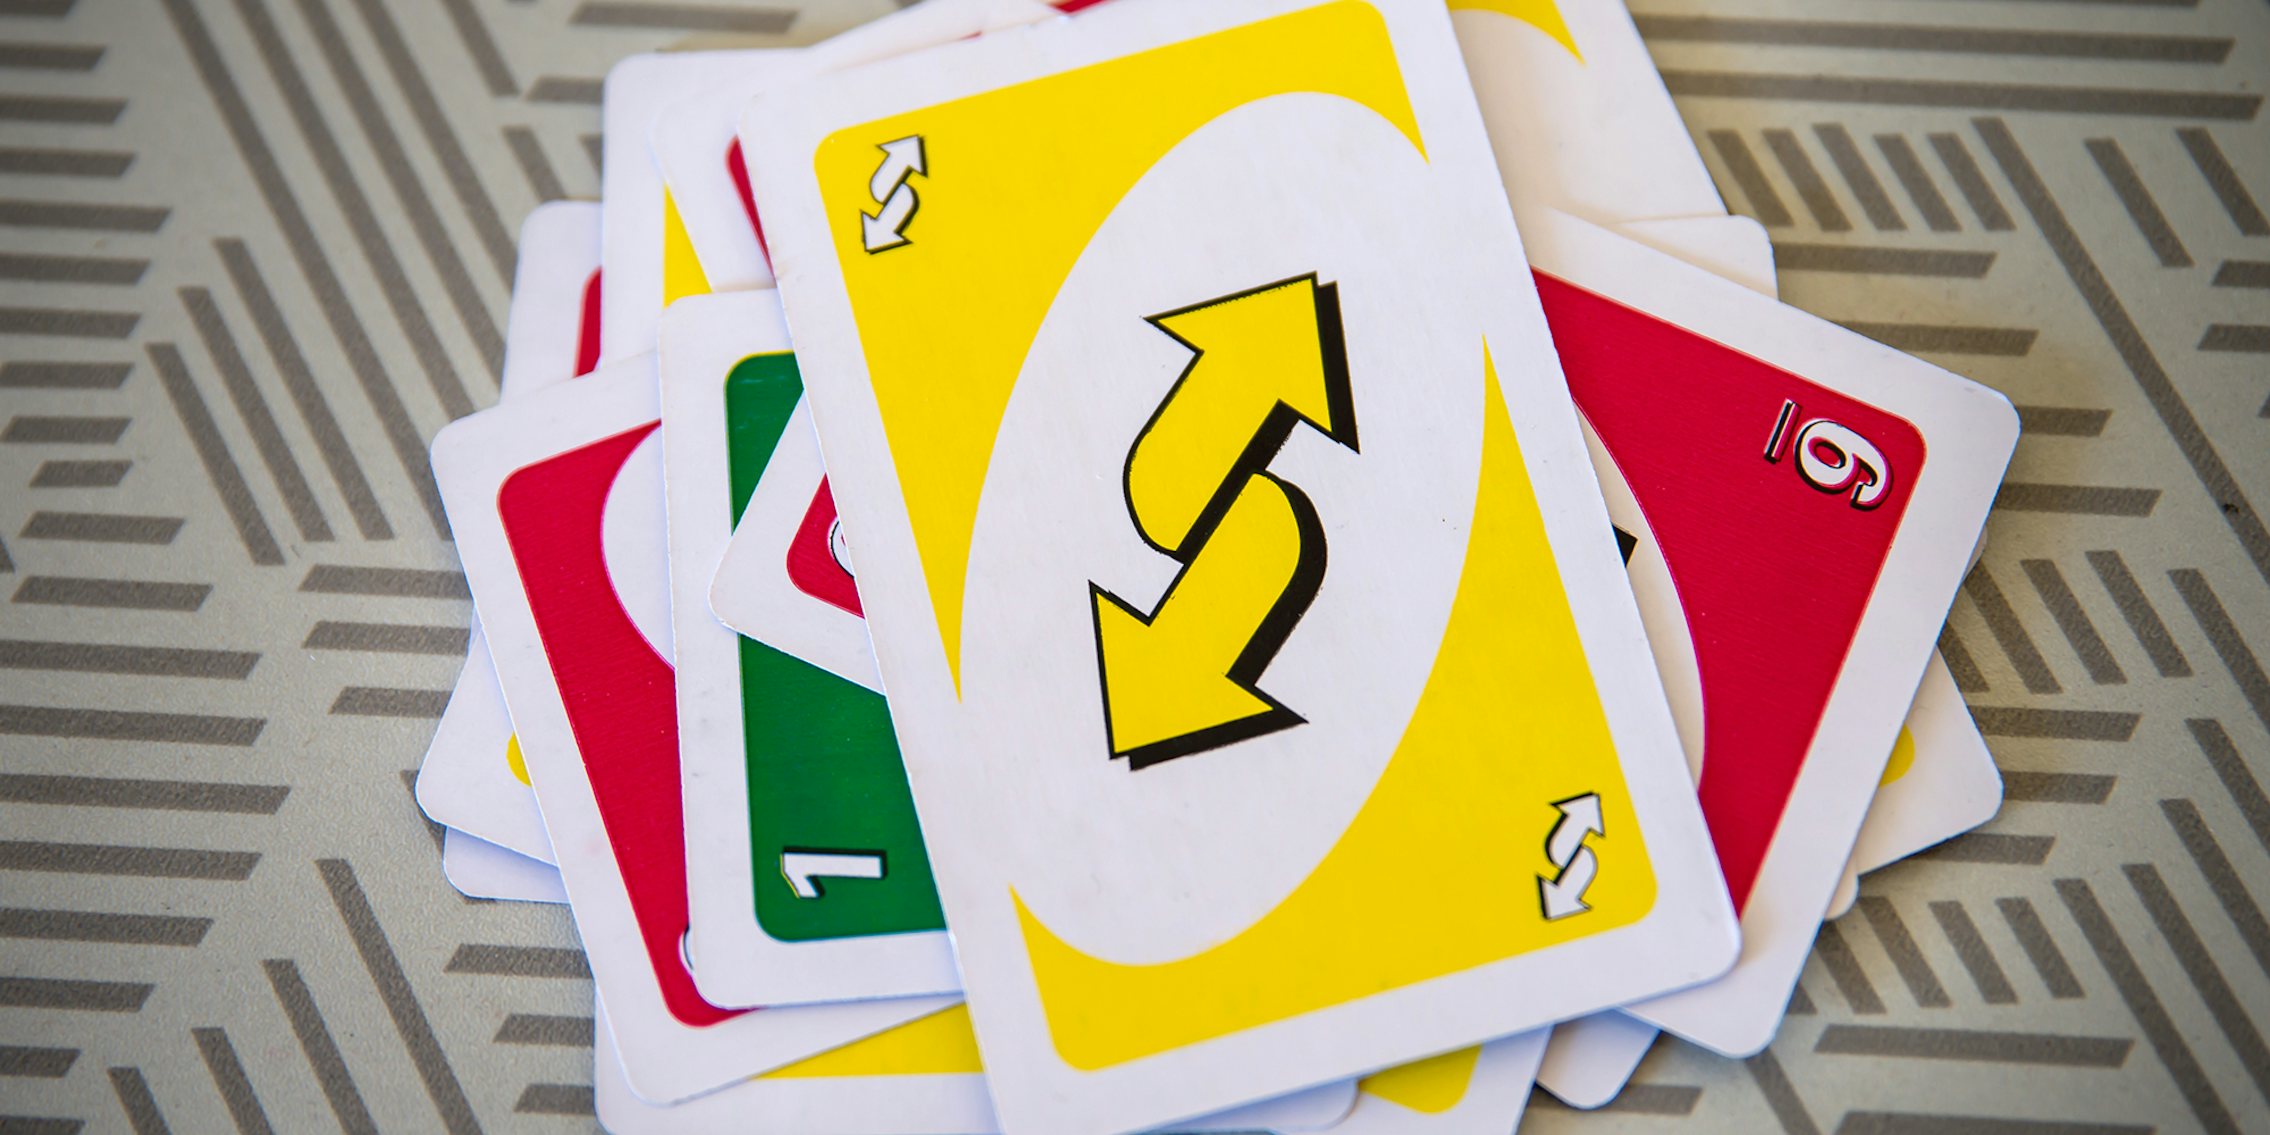 Uno Reverse Card » What does Uno Reverse Card mean? »